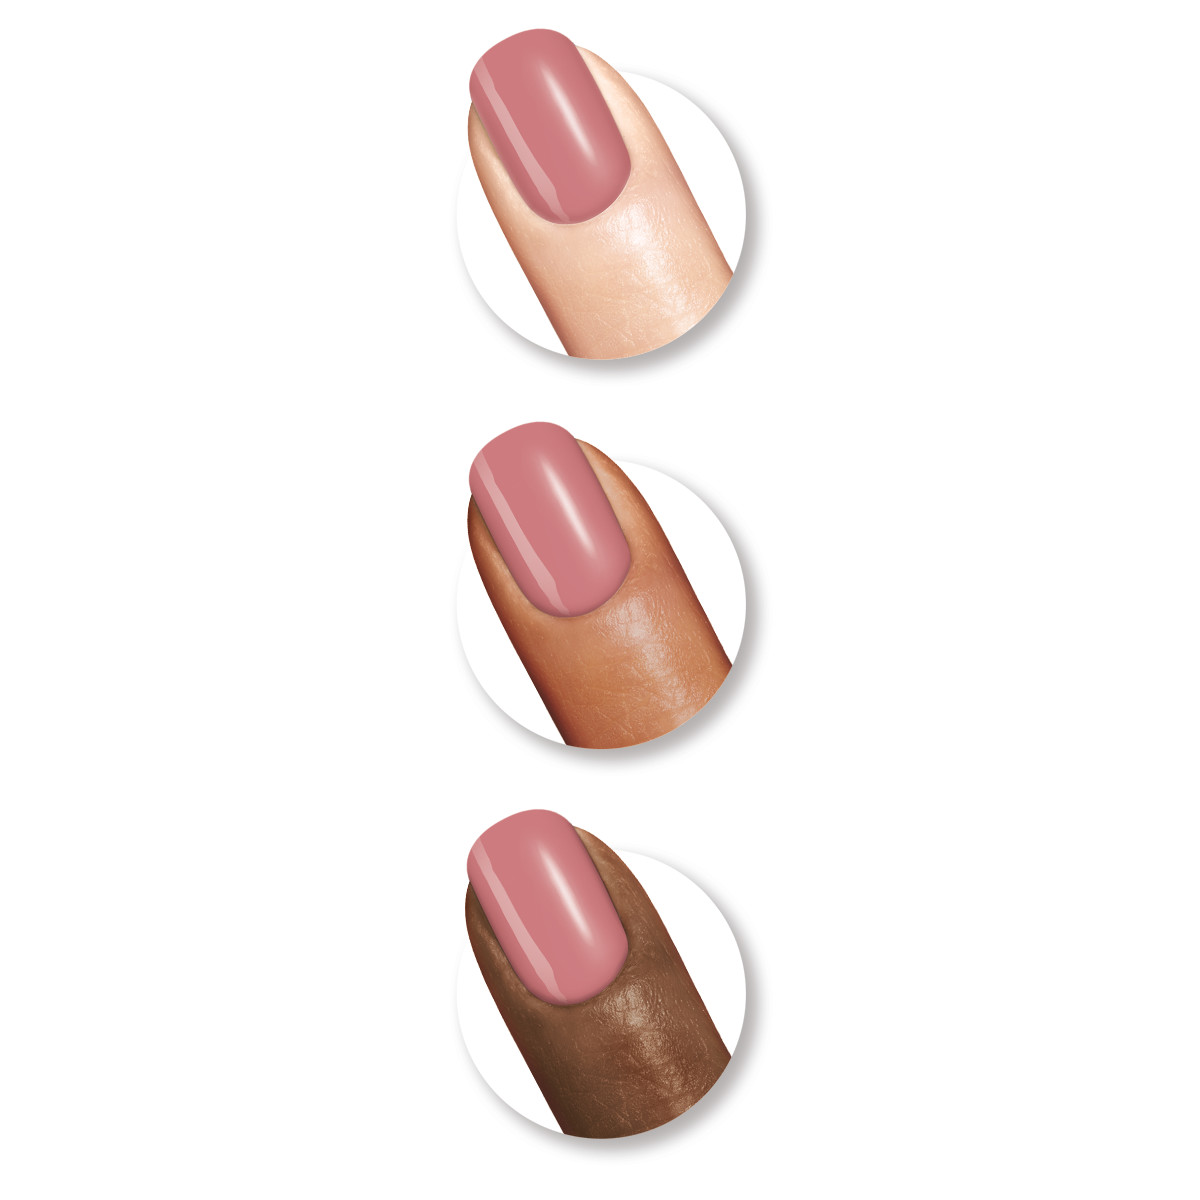 Sally Hansen Complete Salon Manicure Nail Color, Pink Pong - image 2 of 2